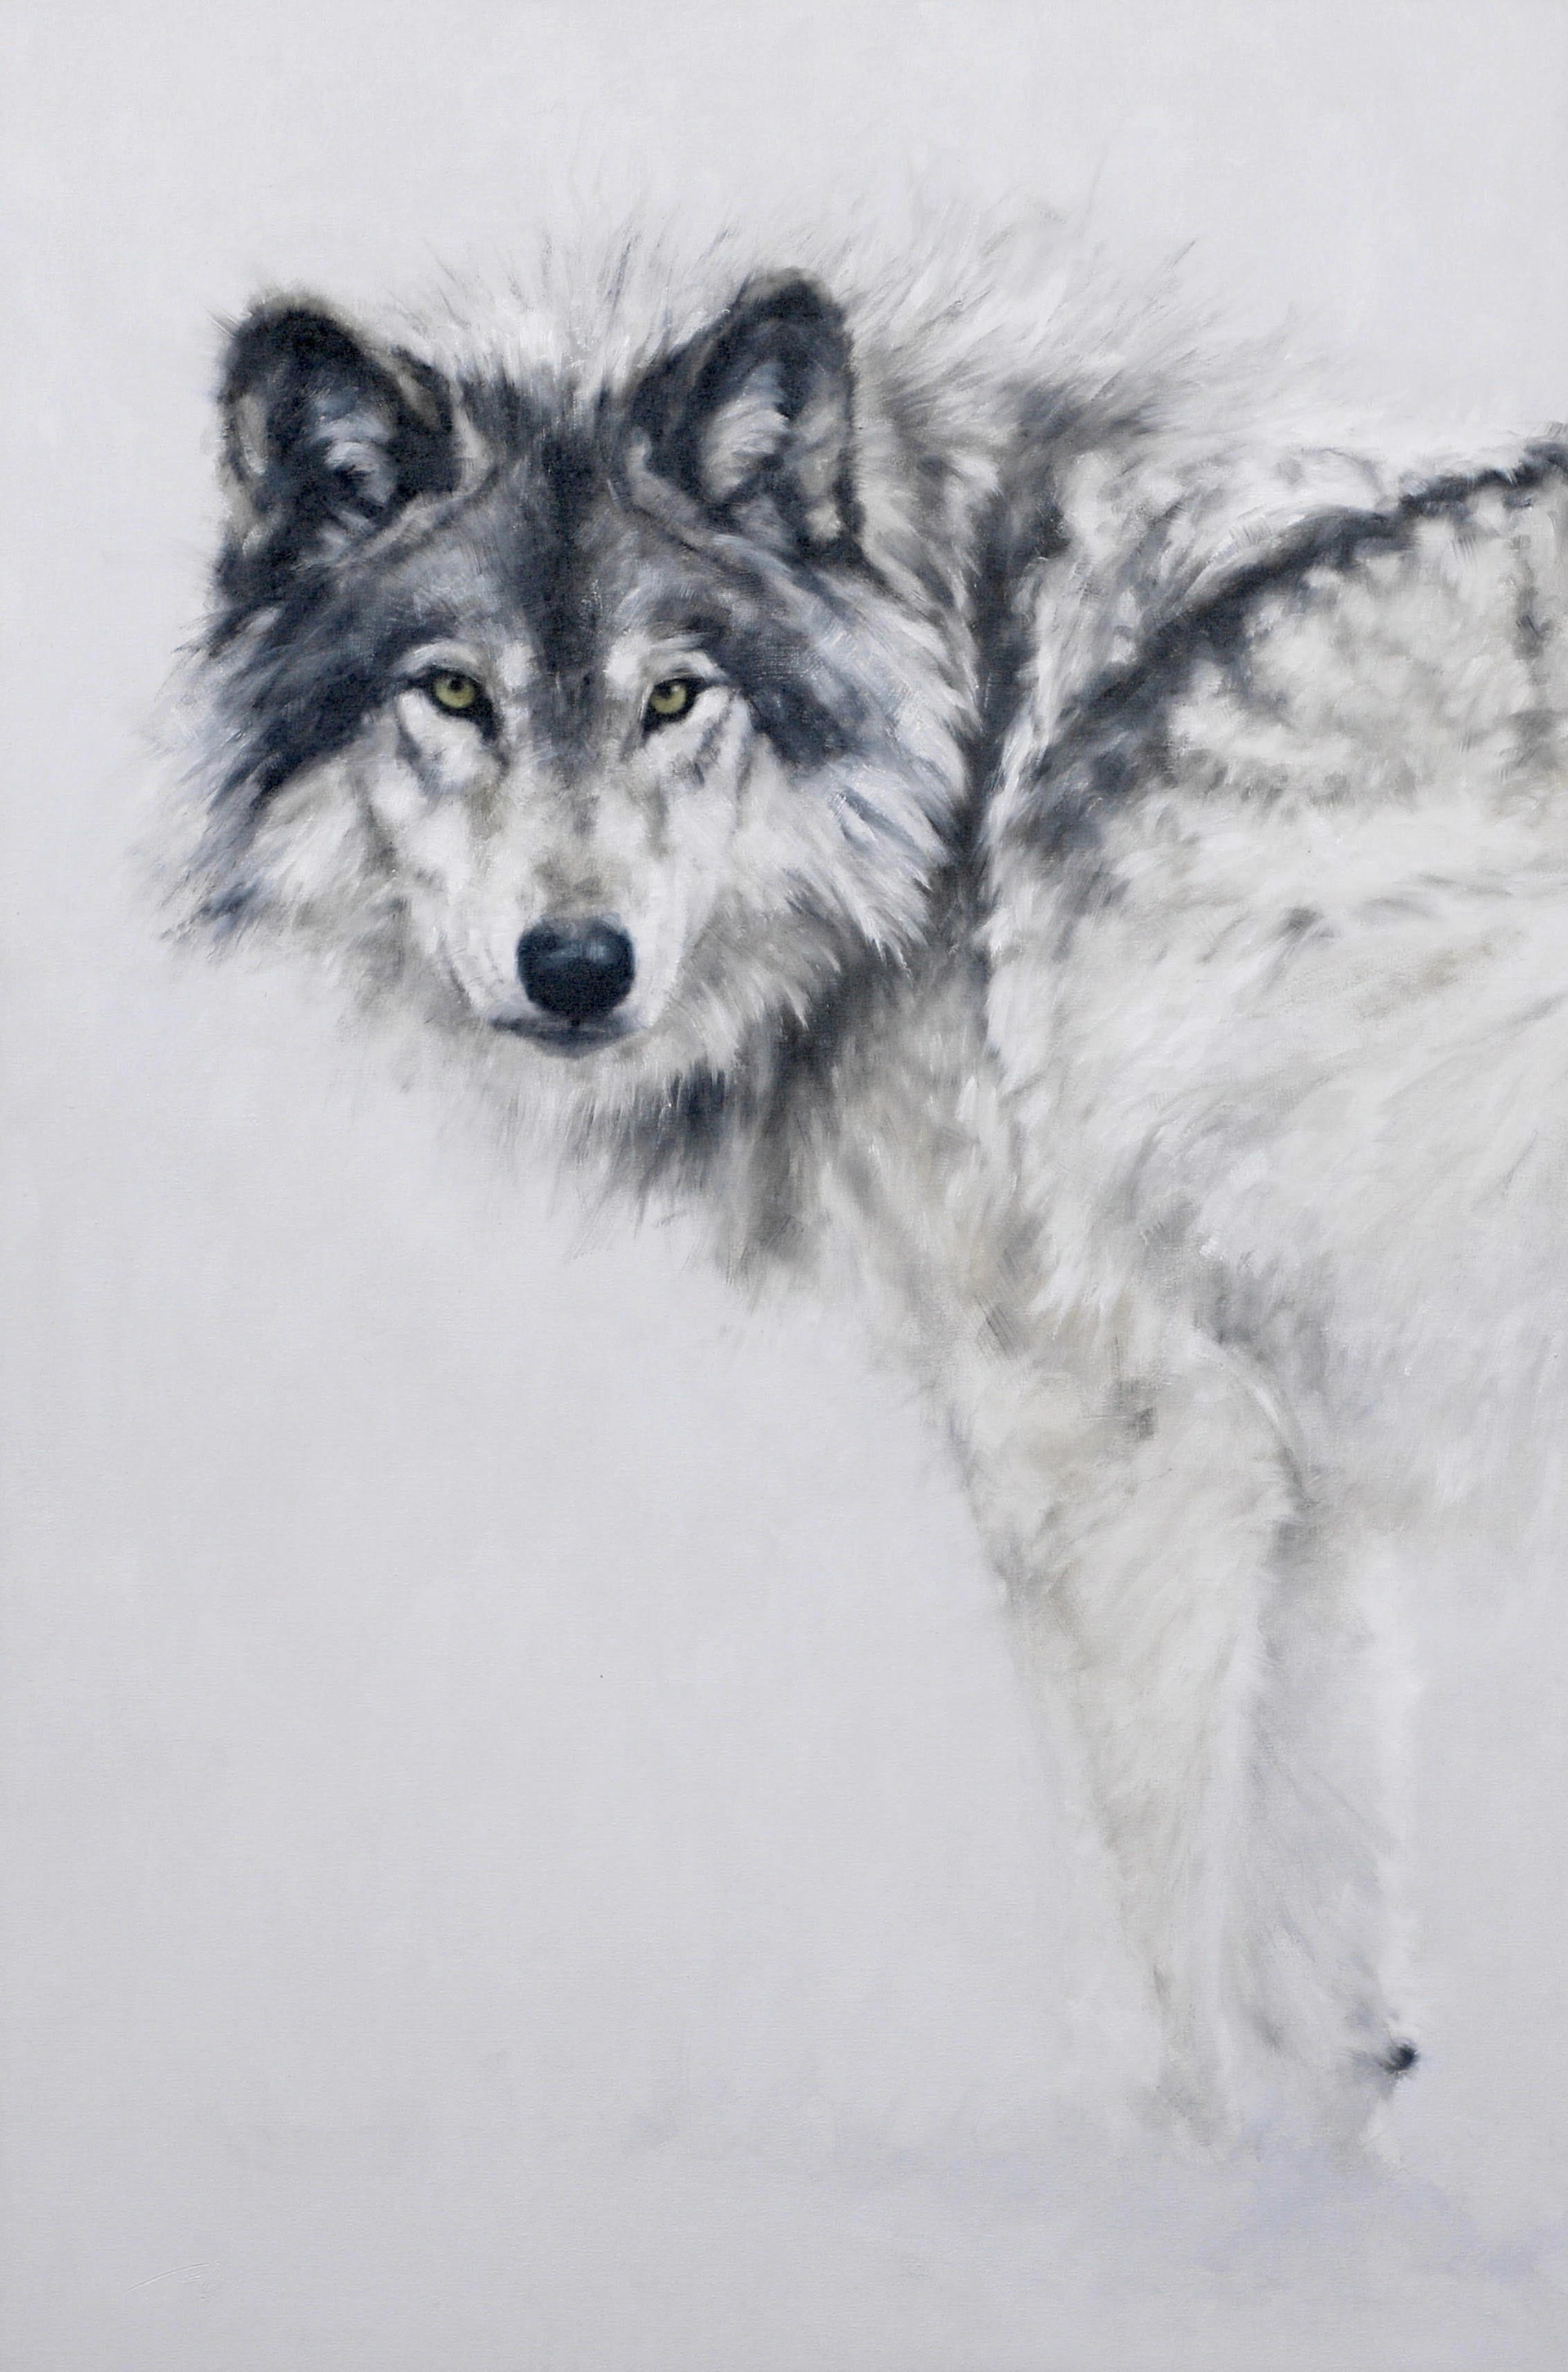 Original Oil Painting Featuring A Wolf Looking Back At Viewer With White Snowy Background